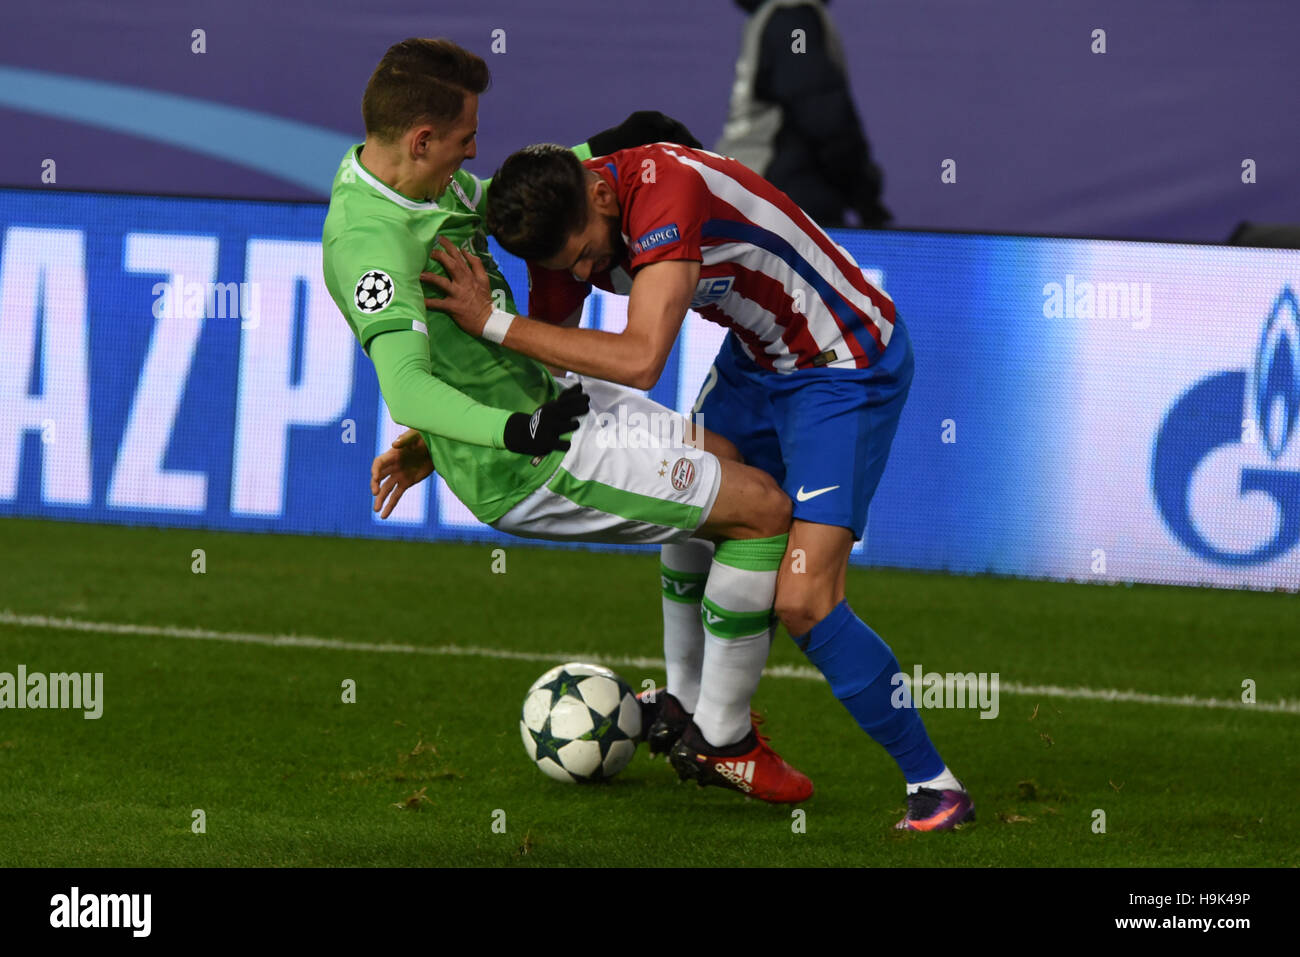 Madrid, Spain. 23rd Nov, 2016. PSV's Santiago Arias and Atletico's Carrasco in action during the UEFA Champions League match between Atlético de Madrid (Spain) and PSV Eindhoven (Netherlands) at Vicente Calderón stadium. Atletico de Madrid beat PSV (2-0) in the Champions League Group D match played at the Vicente Calderón in Madrid. Credit:  Jorge Sanz/Pacific Press/Alamy Live News Stock Photo